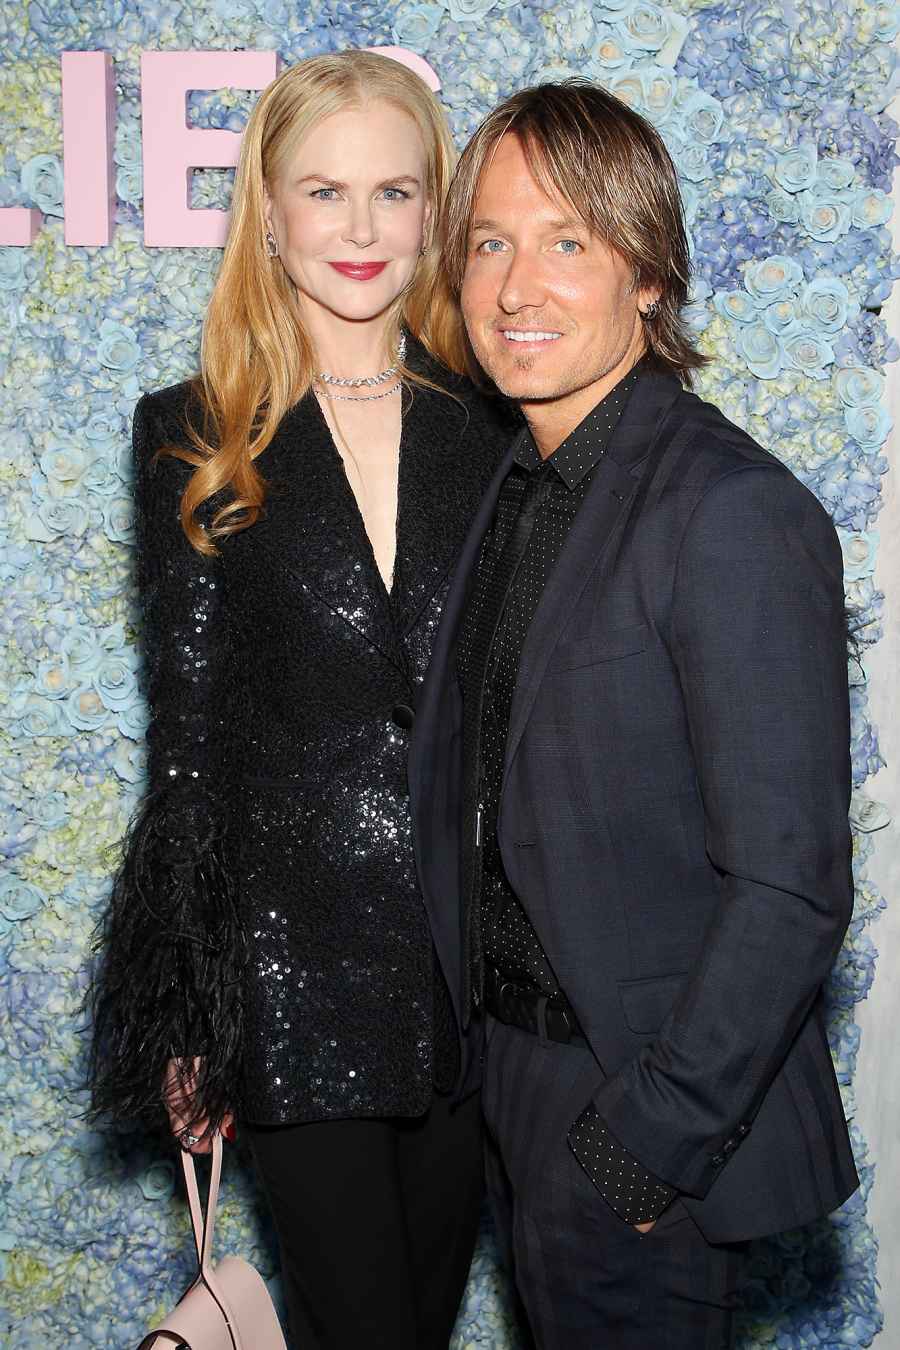 Learning From His Mistakes Keith Urban Most Candid Quotes About His Battle With Alcoholism Wife Nicole Kidman Support